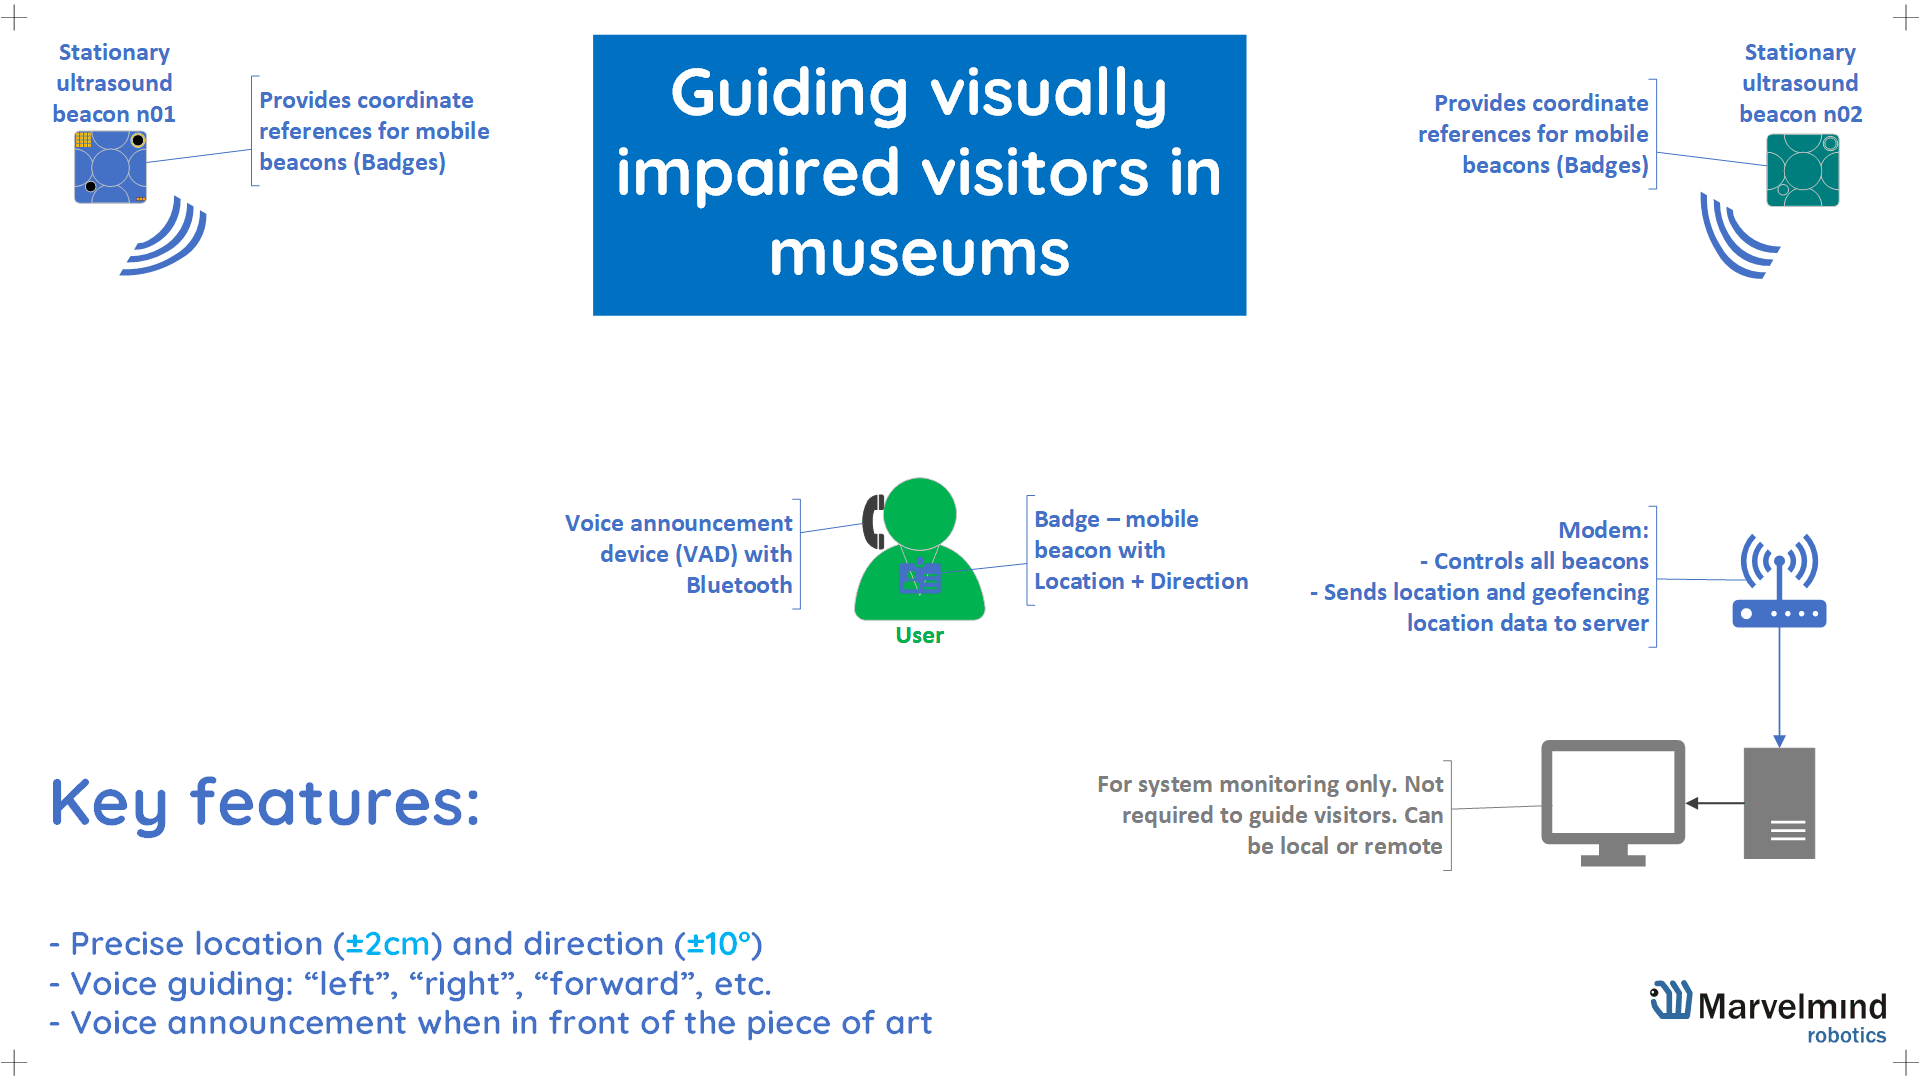 Marvelmind indoor positioning system for voice guiding of visually impaired people in museums